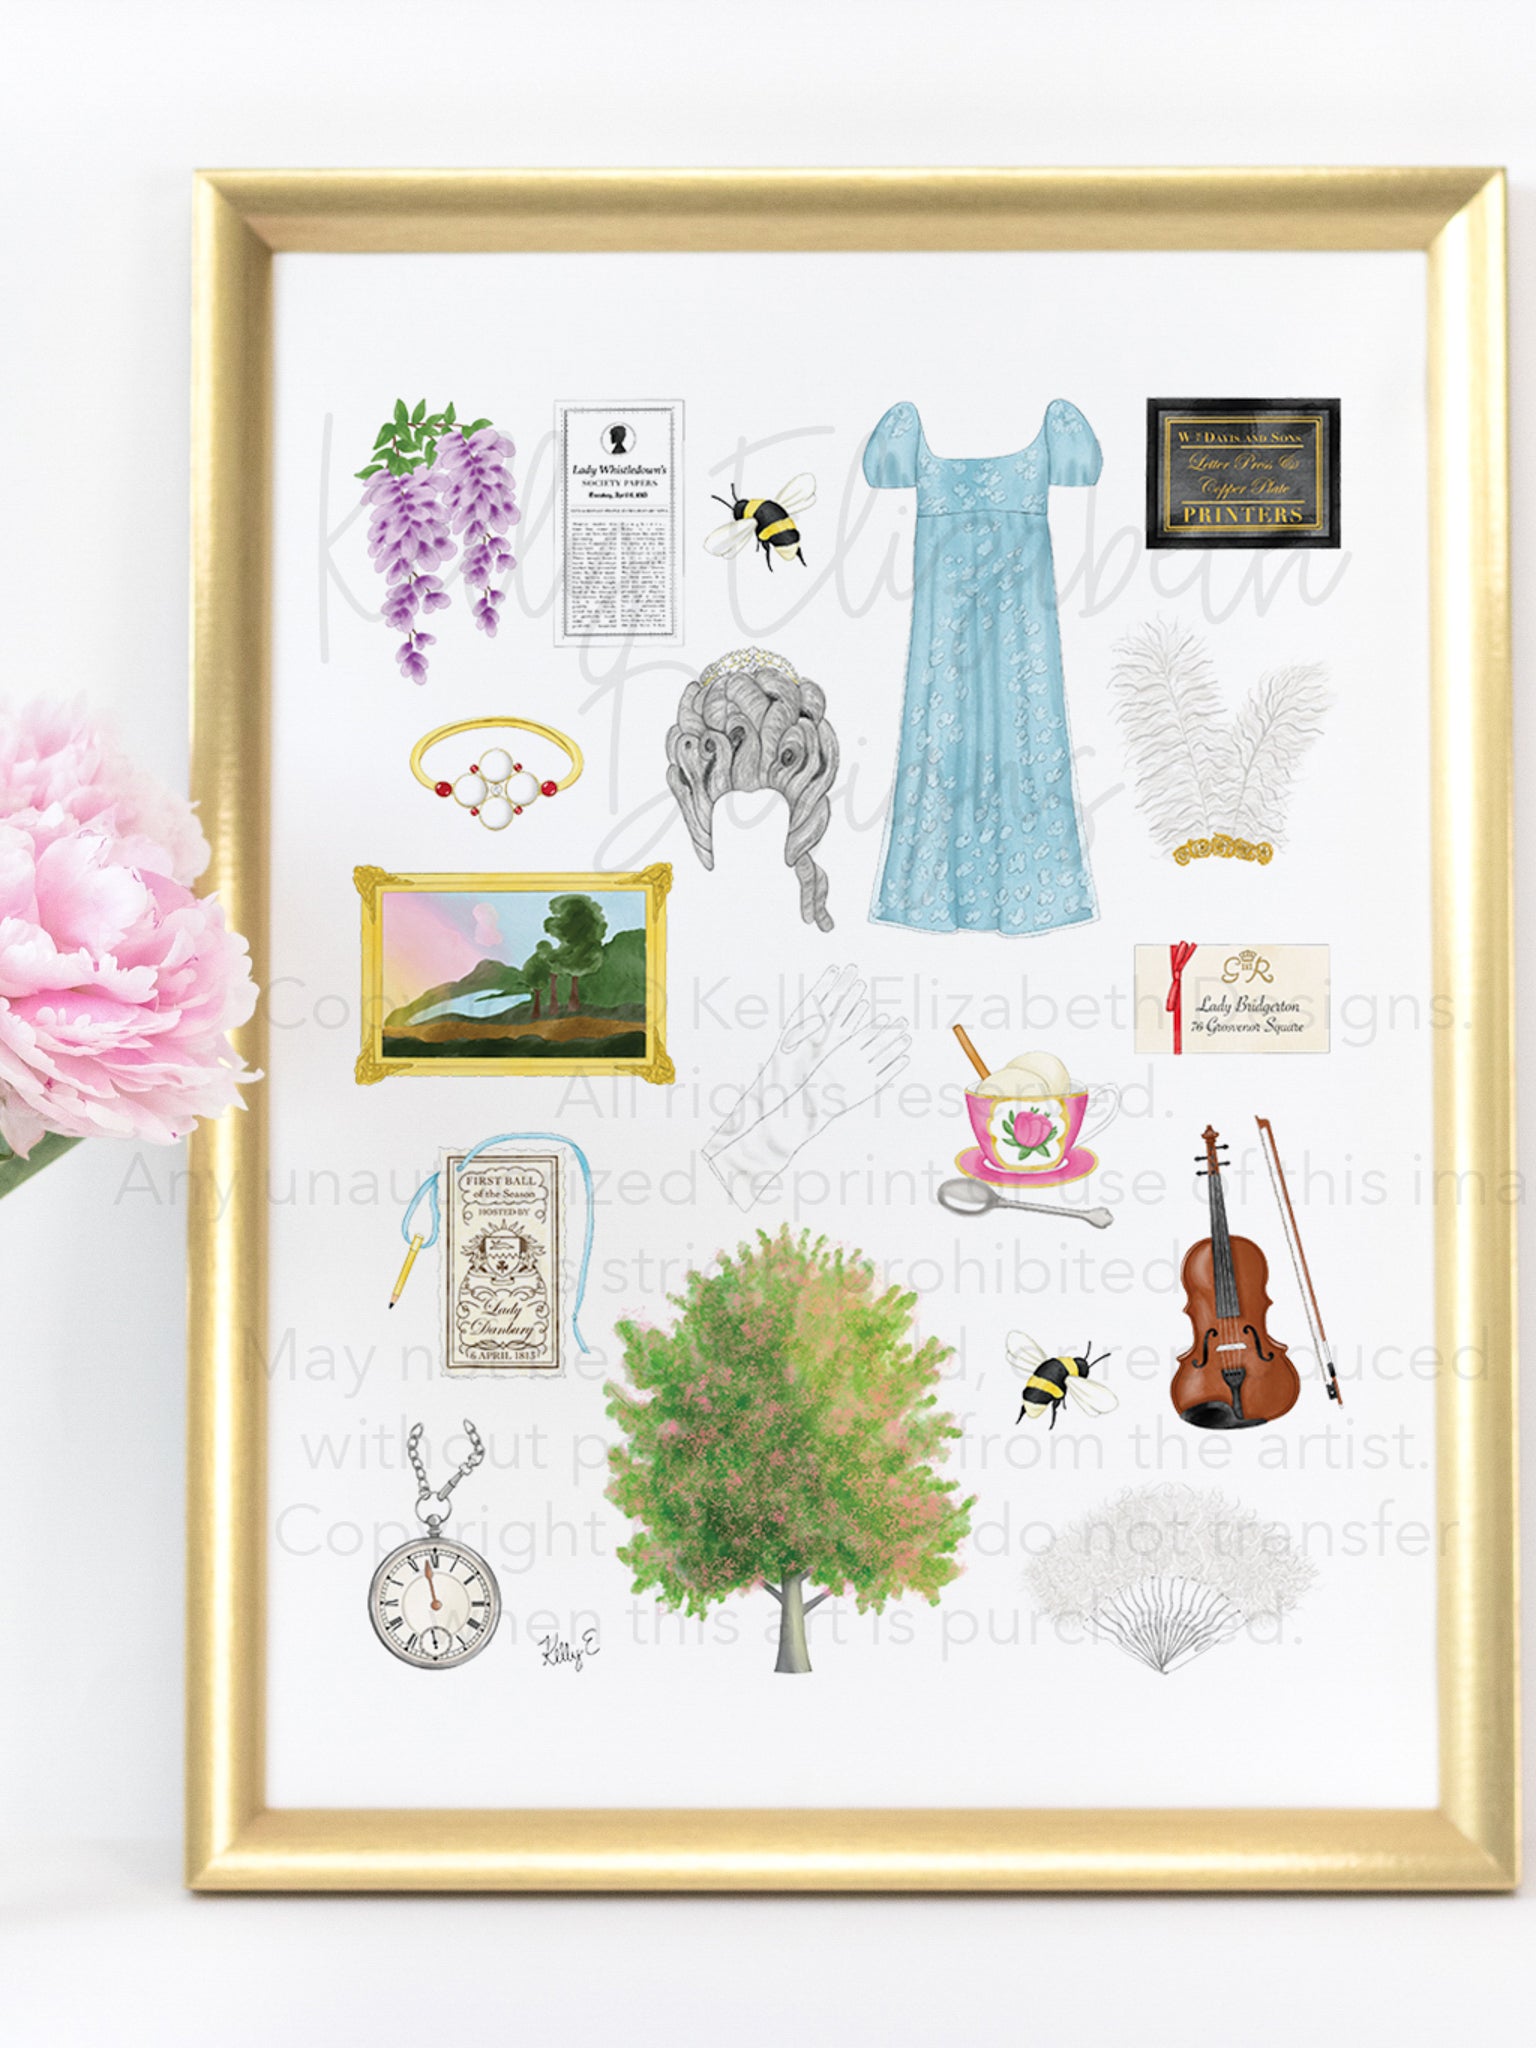 Bridgerton art print. Wisteria, Daphne's ring, Simon's mother's favorite painting, Lady Whistledown's Society Papers, bumble bees, Anthony's pocket watch, Daphne's dress, the Queen's wig, the iconic spoon, the tree from the opening credits, the Danbury ball dance card